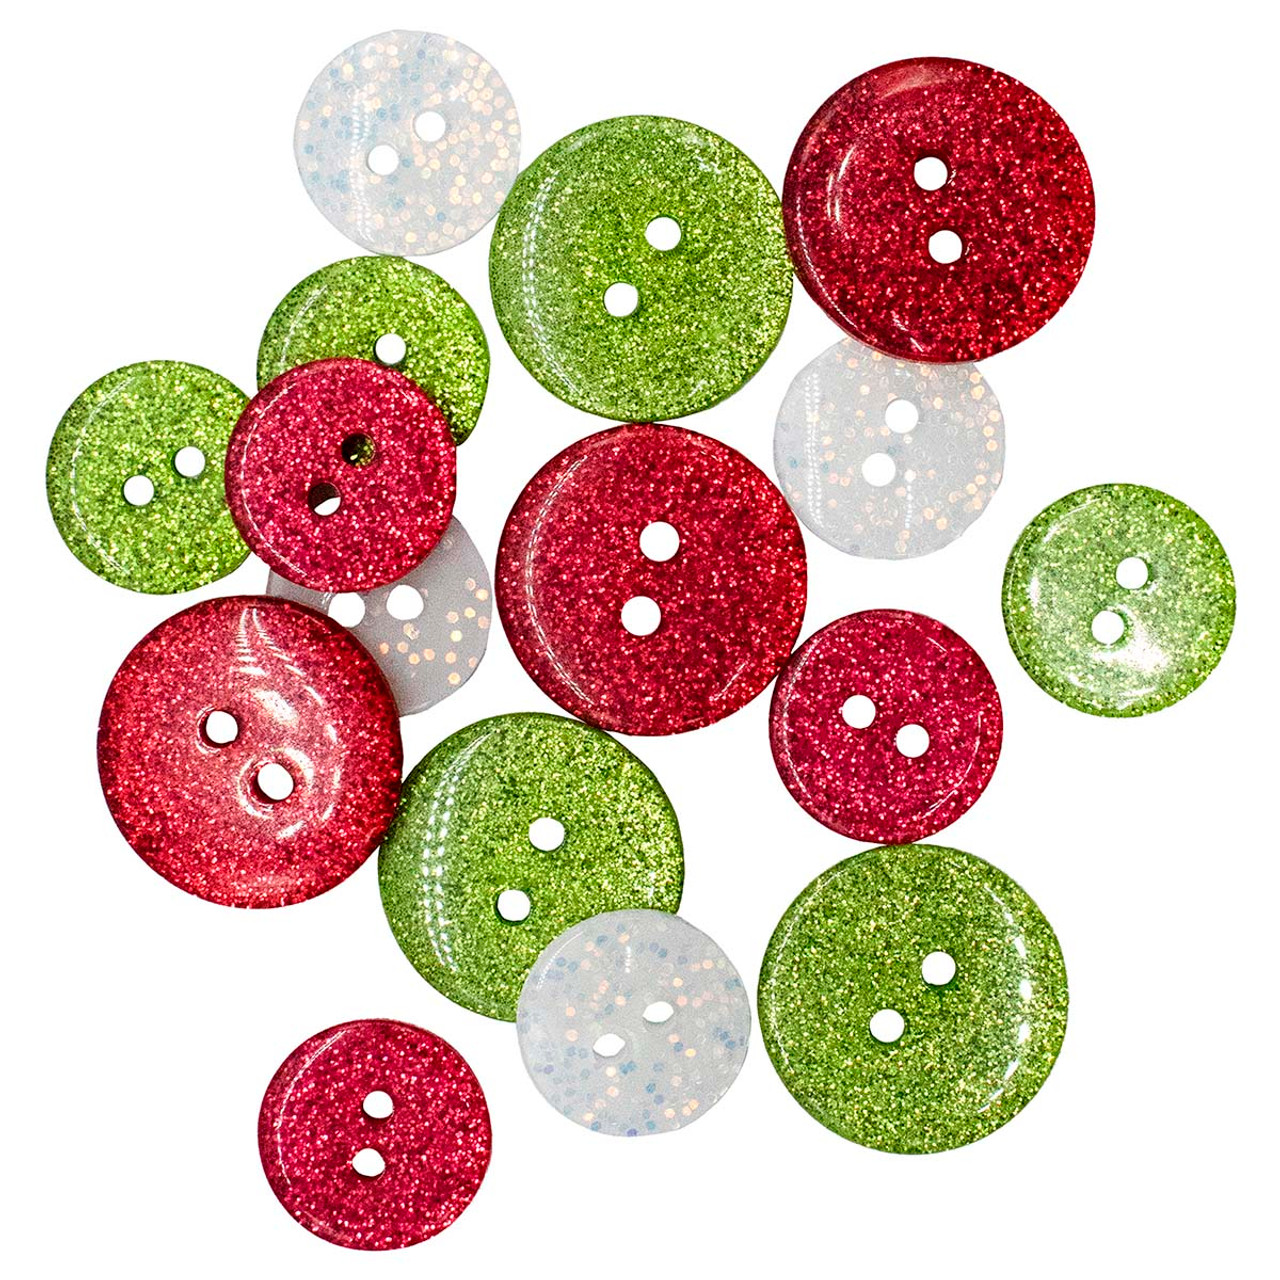 Buttons Galore Tiny Buttons Valentine Heart